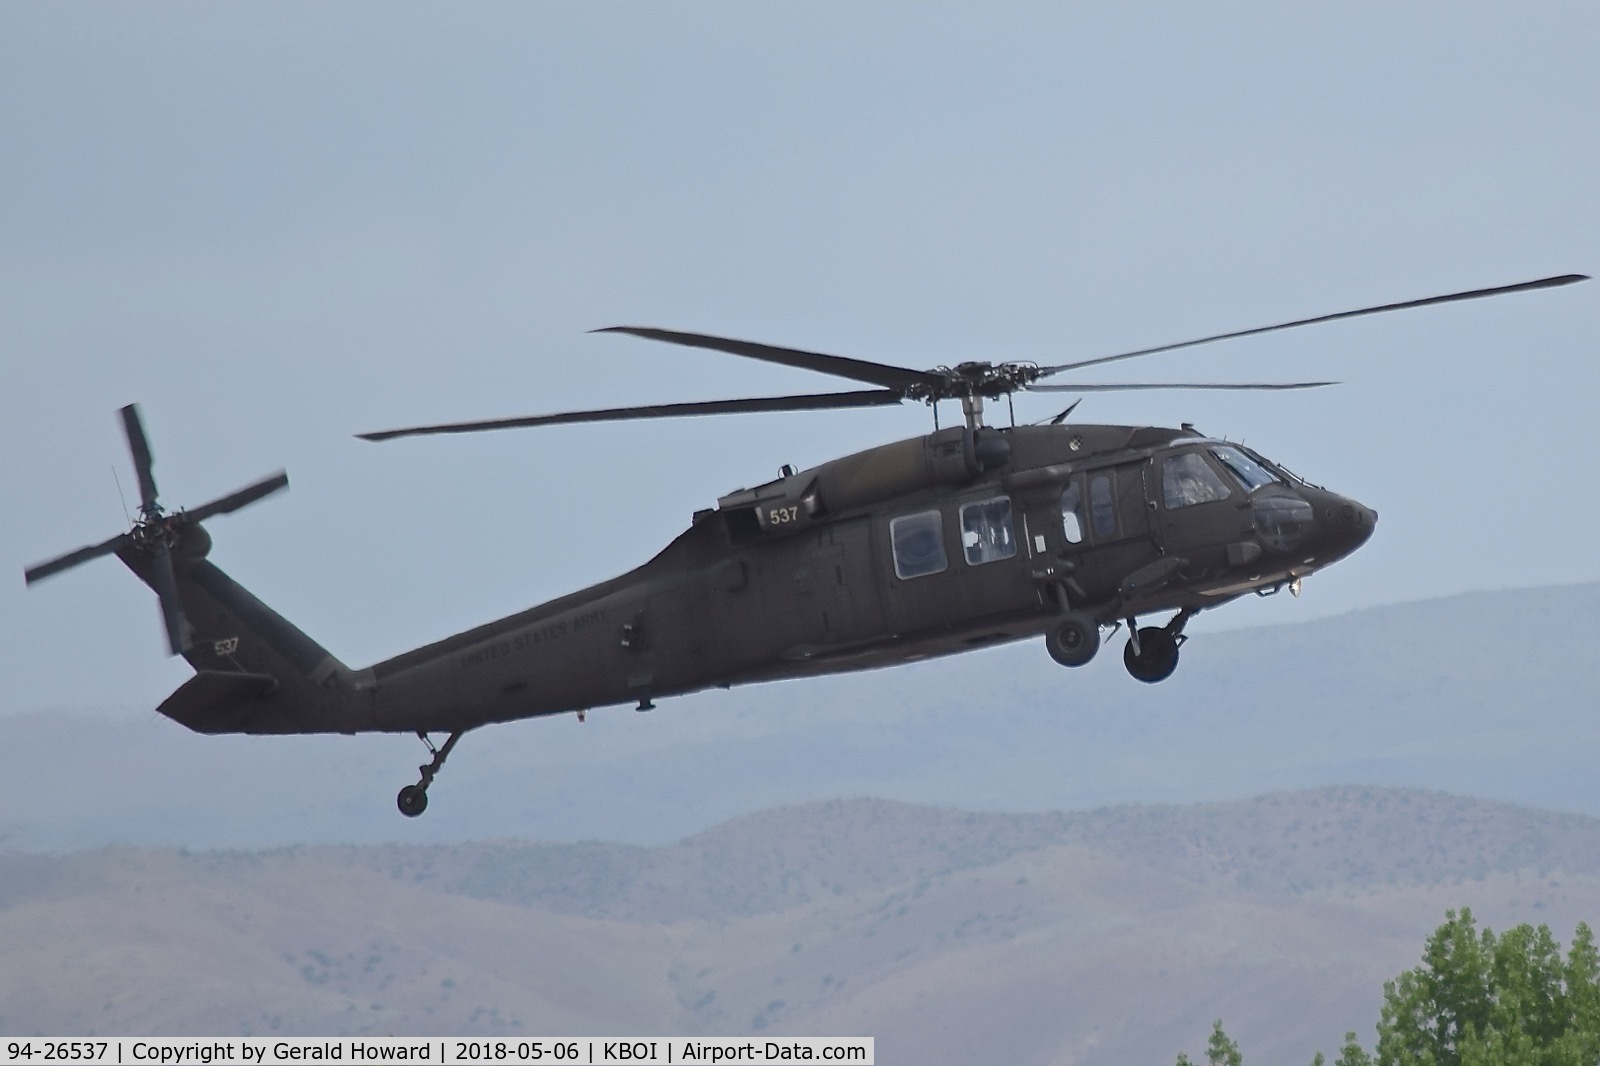 94-26537, 1994 Sikorsky UH-60L Black Hawk C/N 70.2054, Cleared to land on RWY 28L.  1-183rd AVN BN, Idaho Army National Guard.